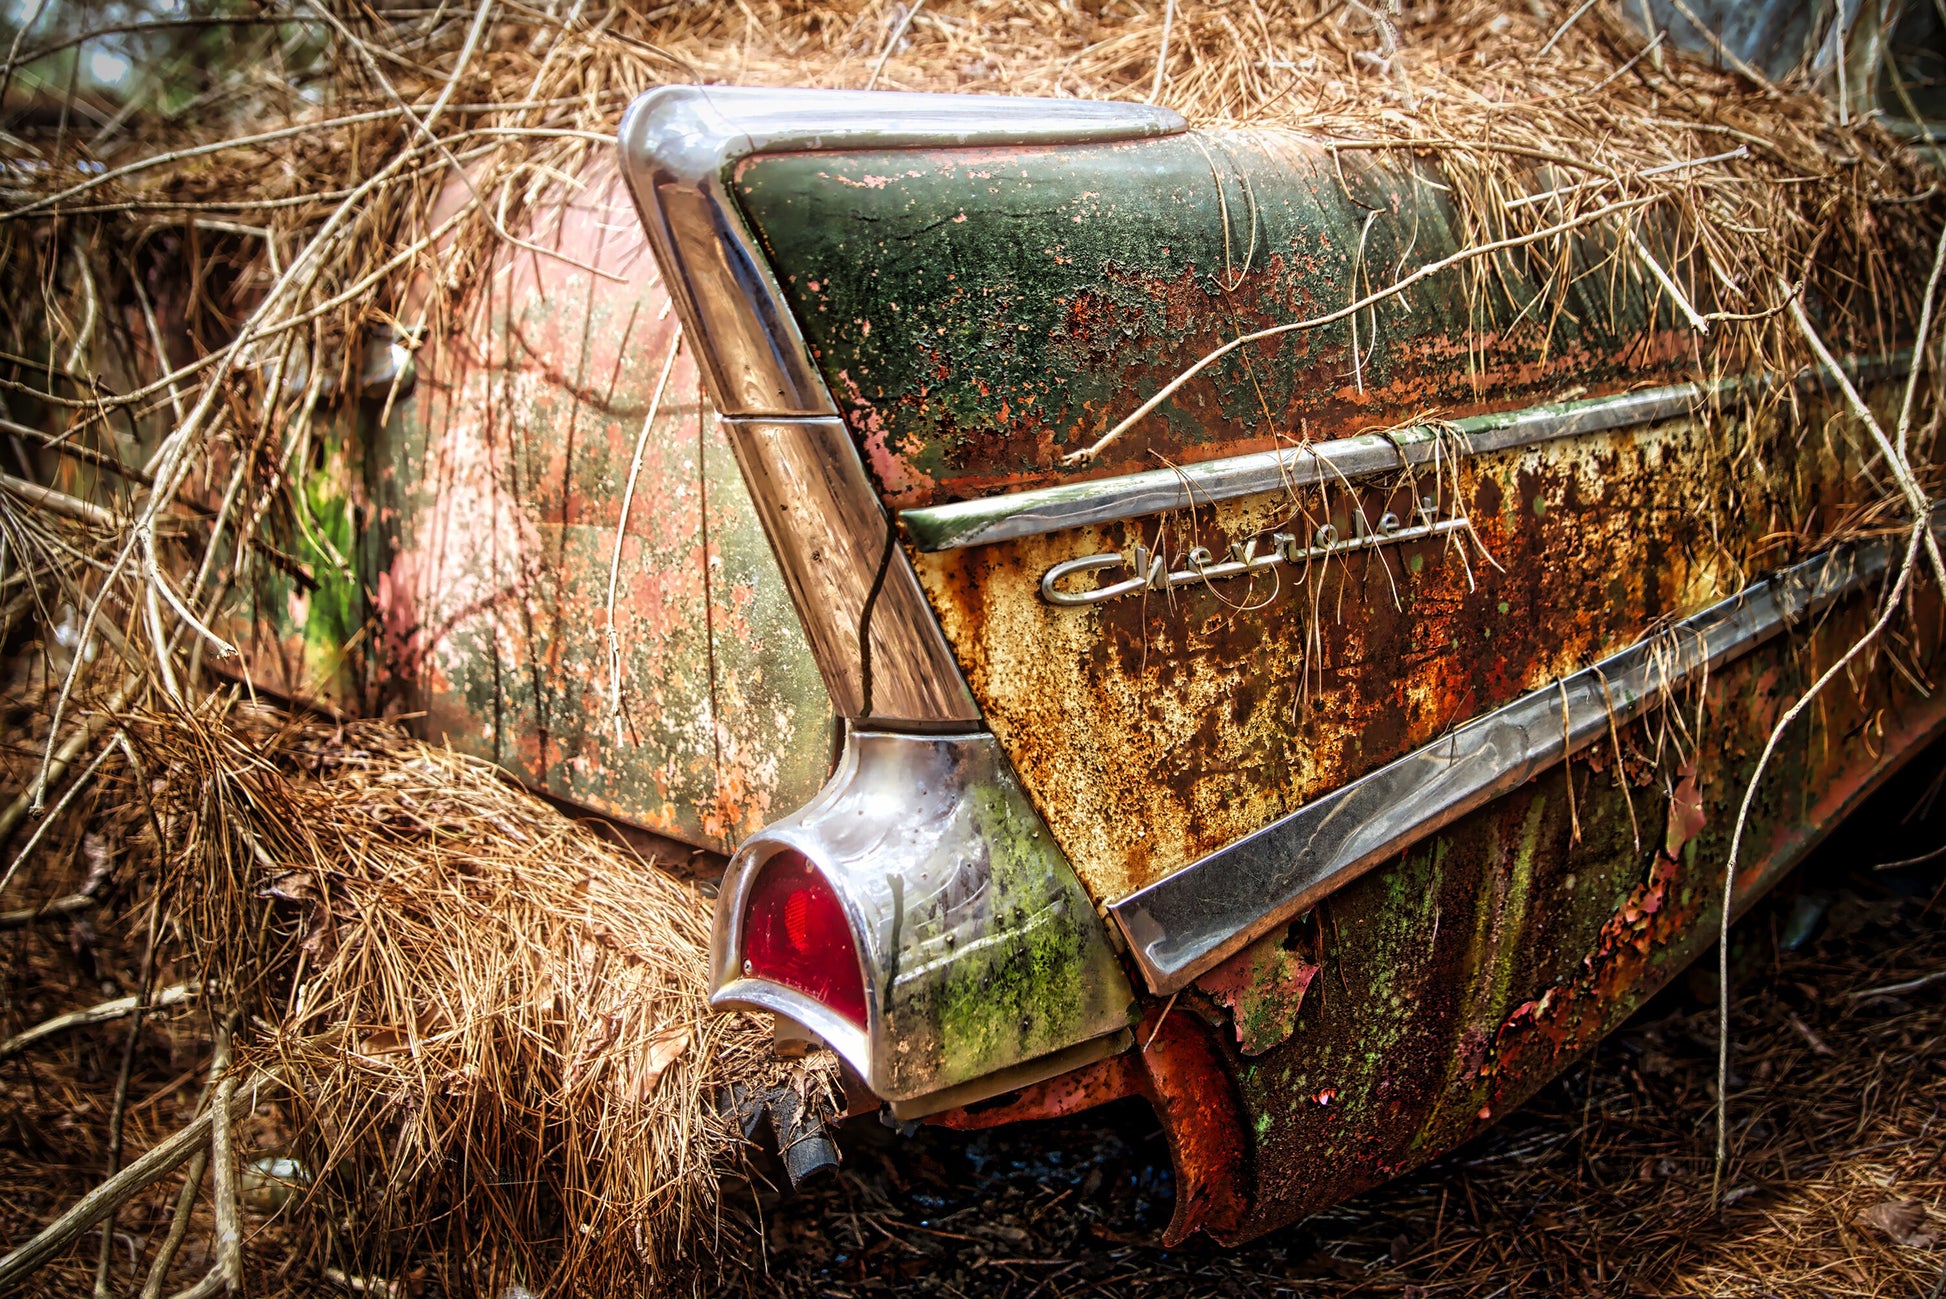 Chevy Bel Air Photography - Gift for men, Office wall art, Metal wall art, Man Cave Photography